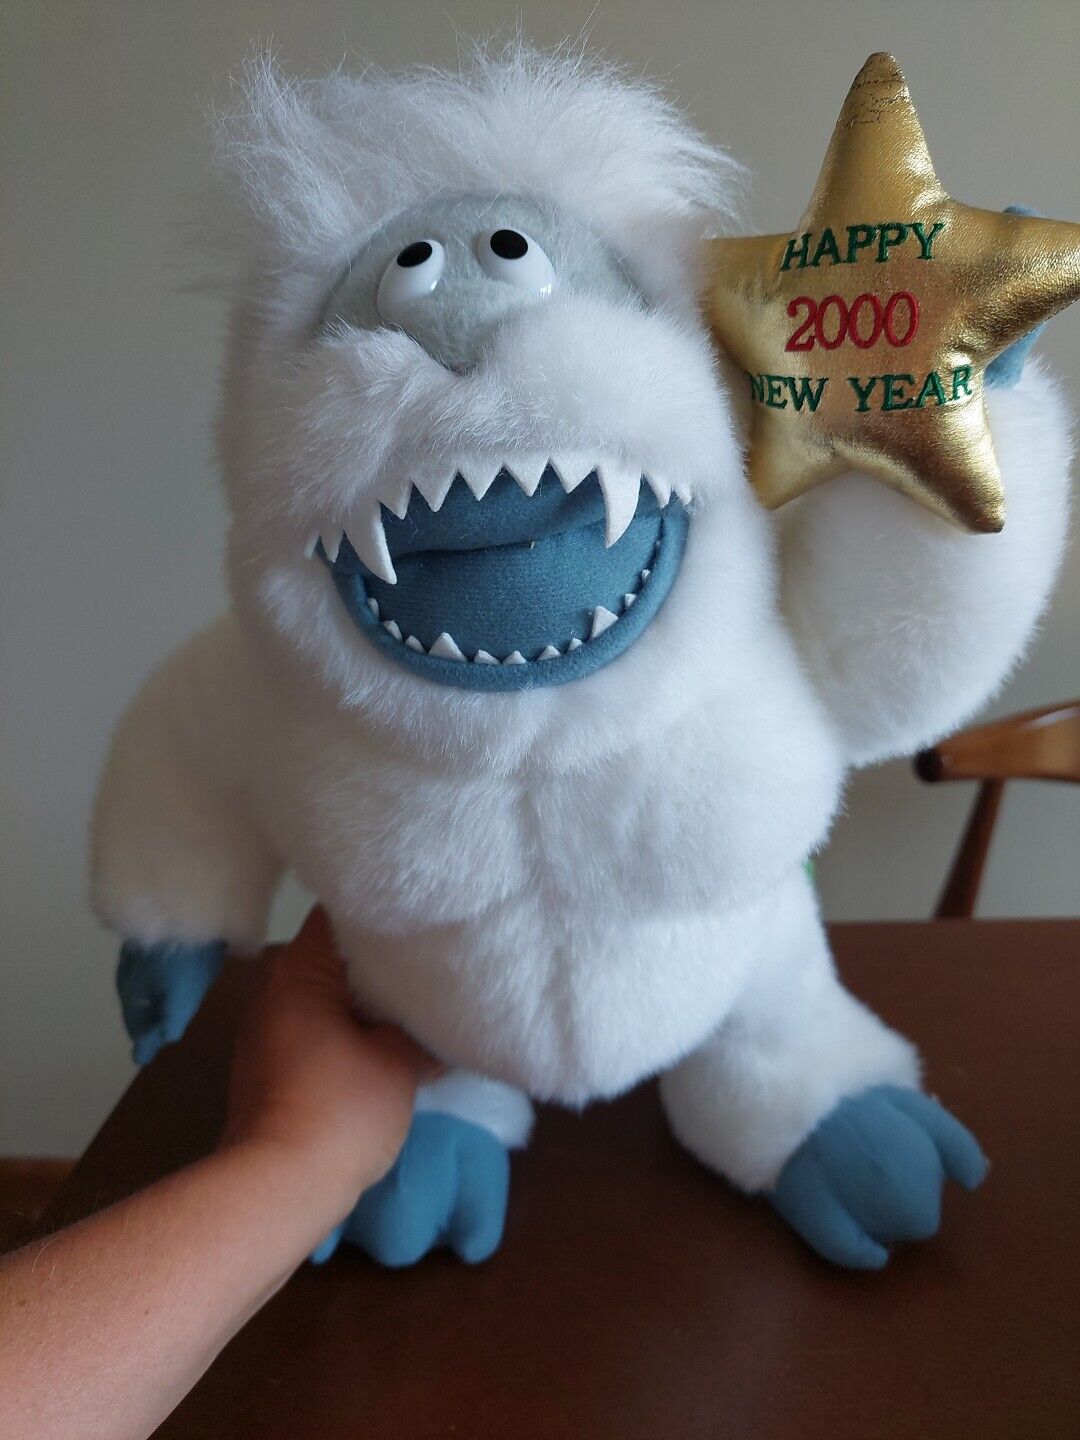 CVS Island Of Misfit Toy BUMBLE ABOMINABLE SNOWMAN 1999 Happy New Year Gold Star